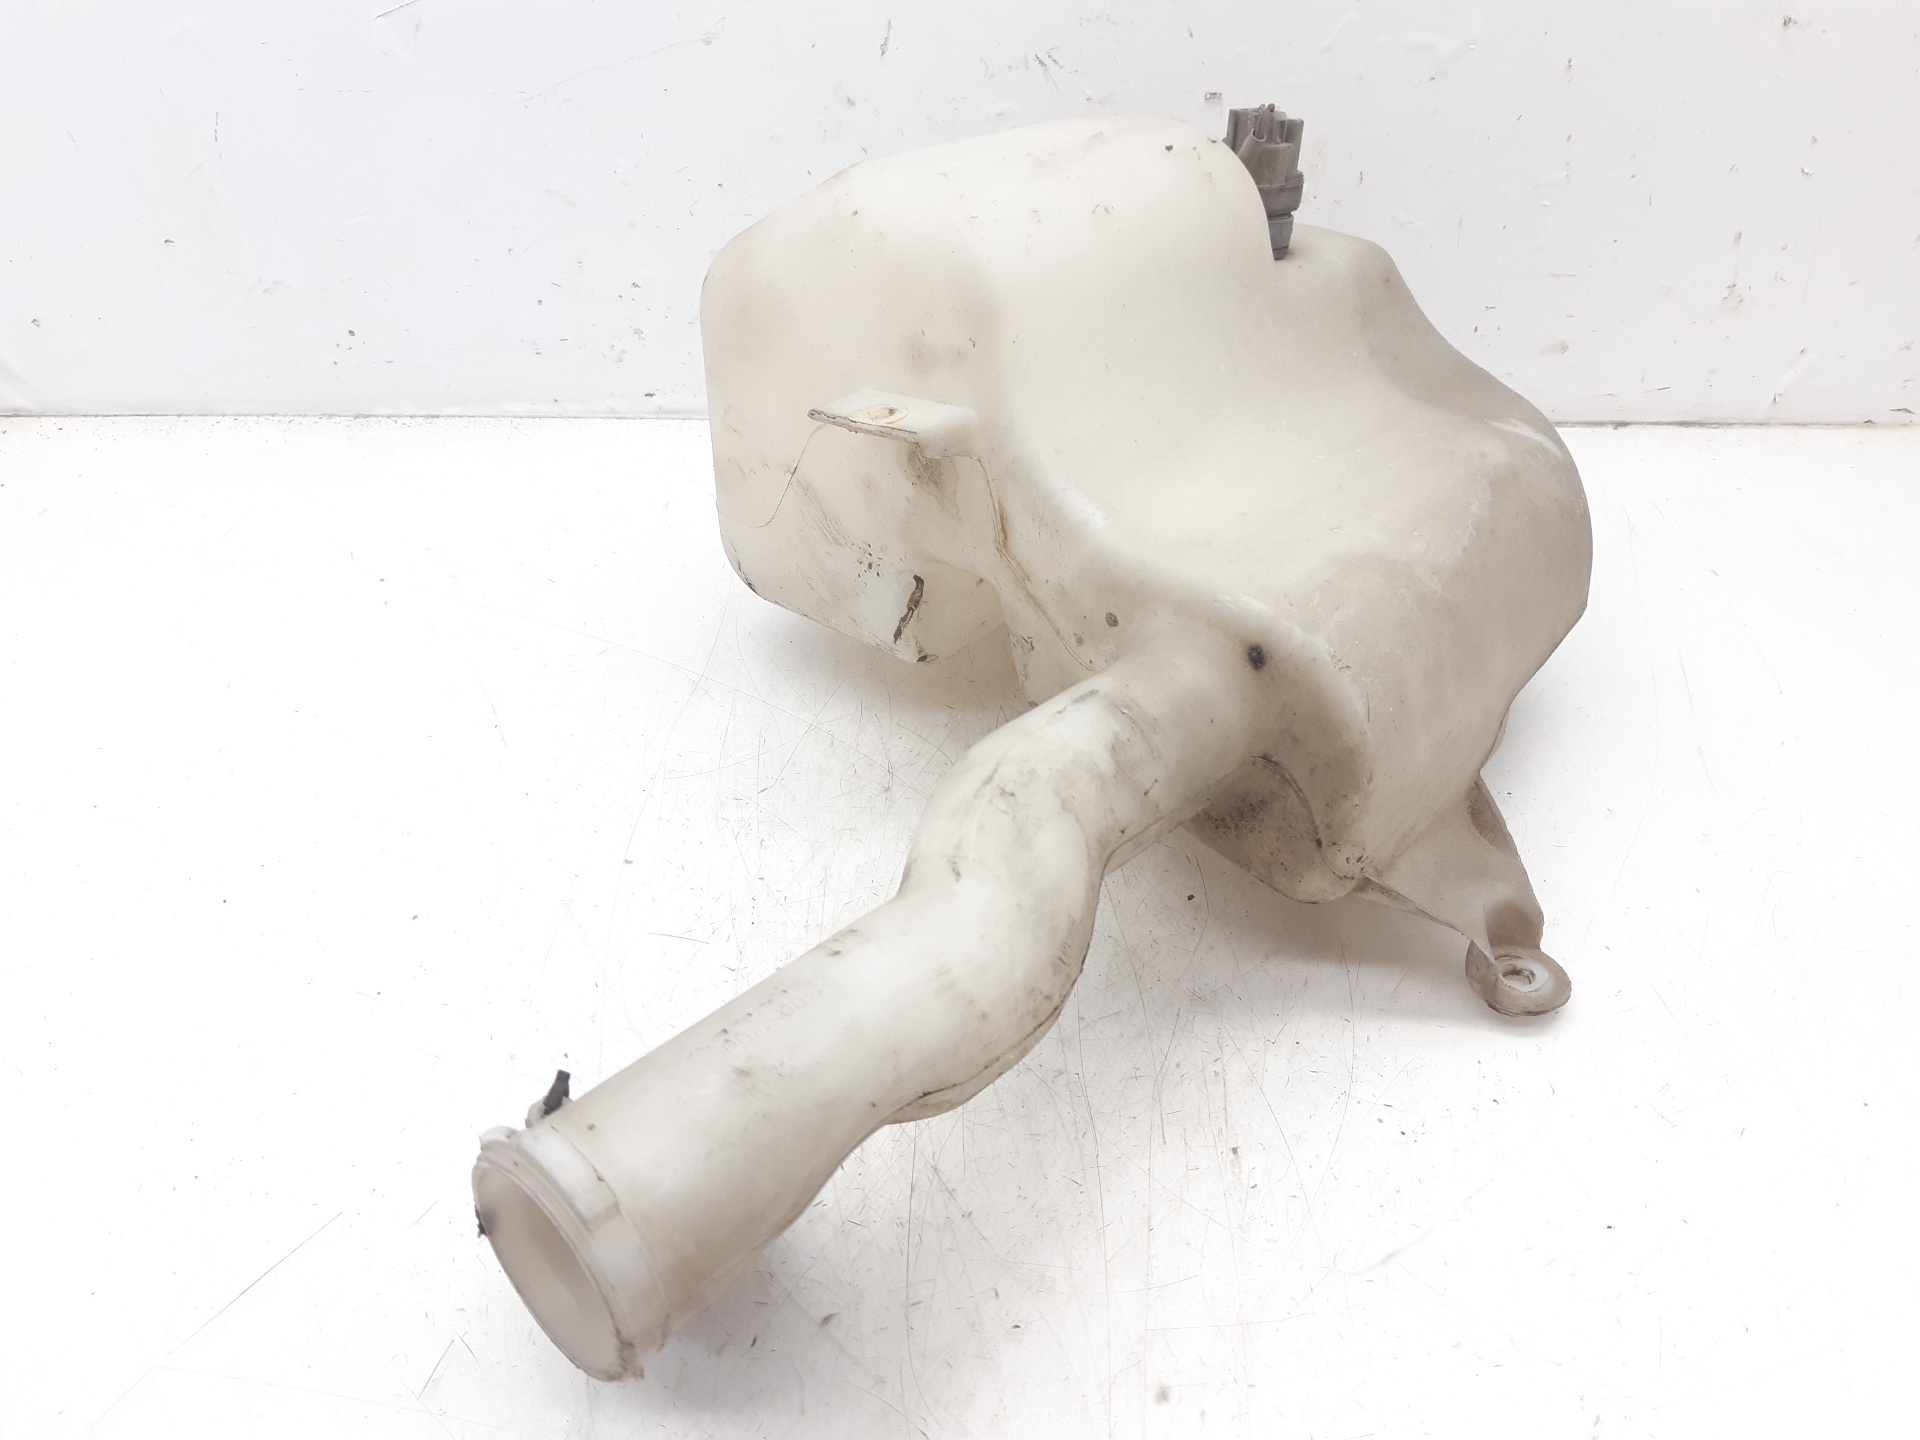 FORD Mondeo 3 generation (2000-2007) Window Washer Tank 1S7113K163AE 18685628